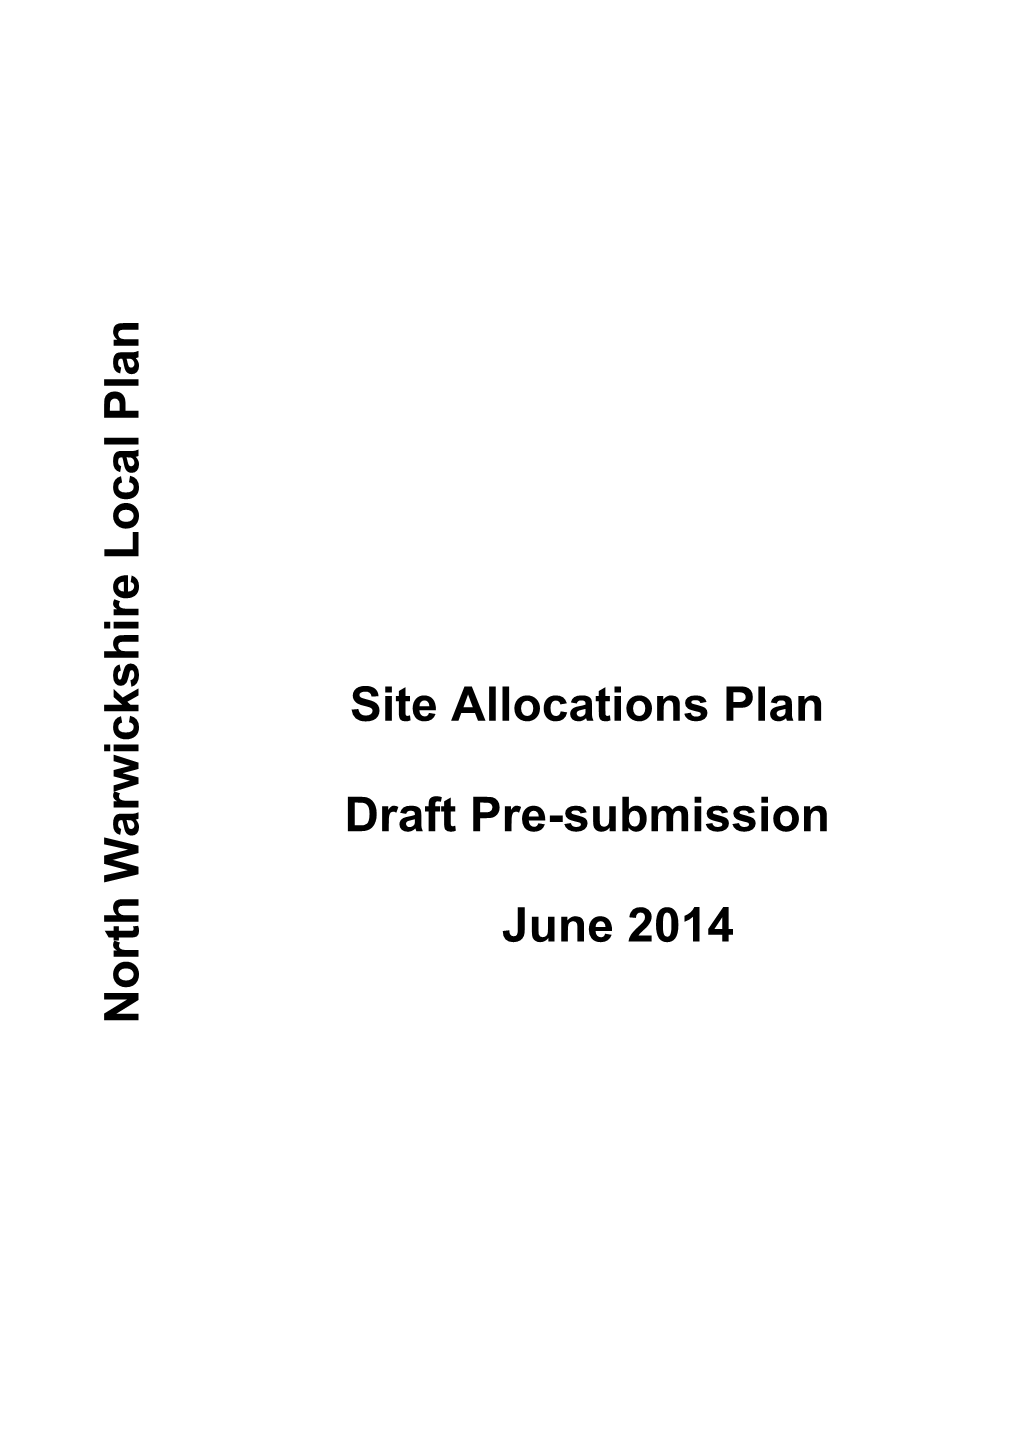 Site Allocations Plan Draft Pre-Submission June 2014 North